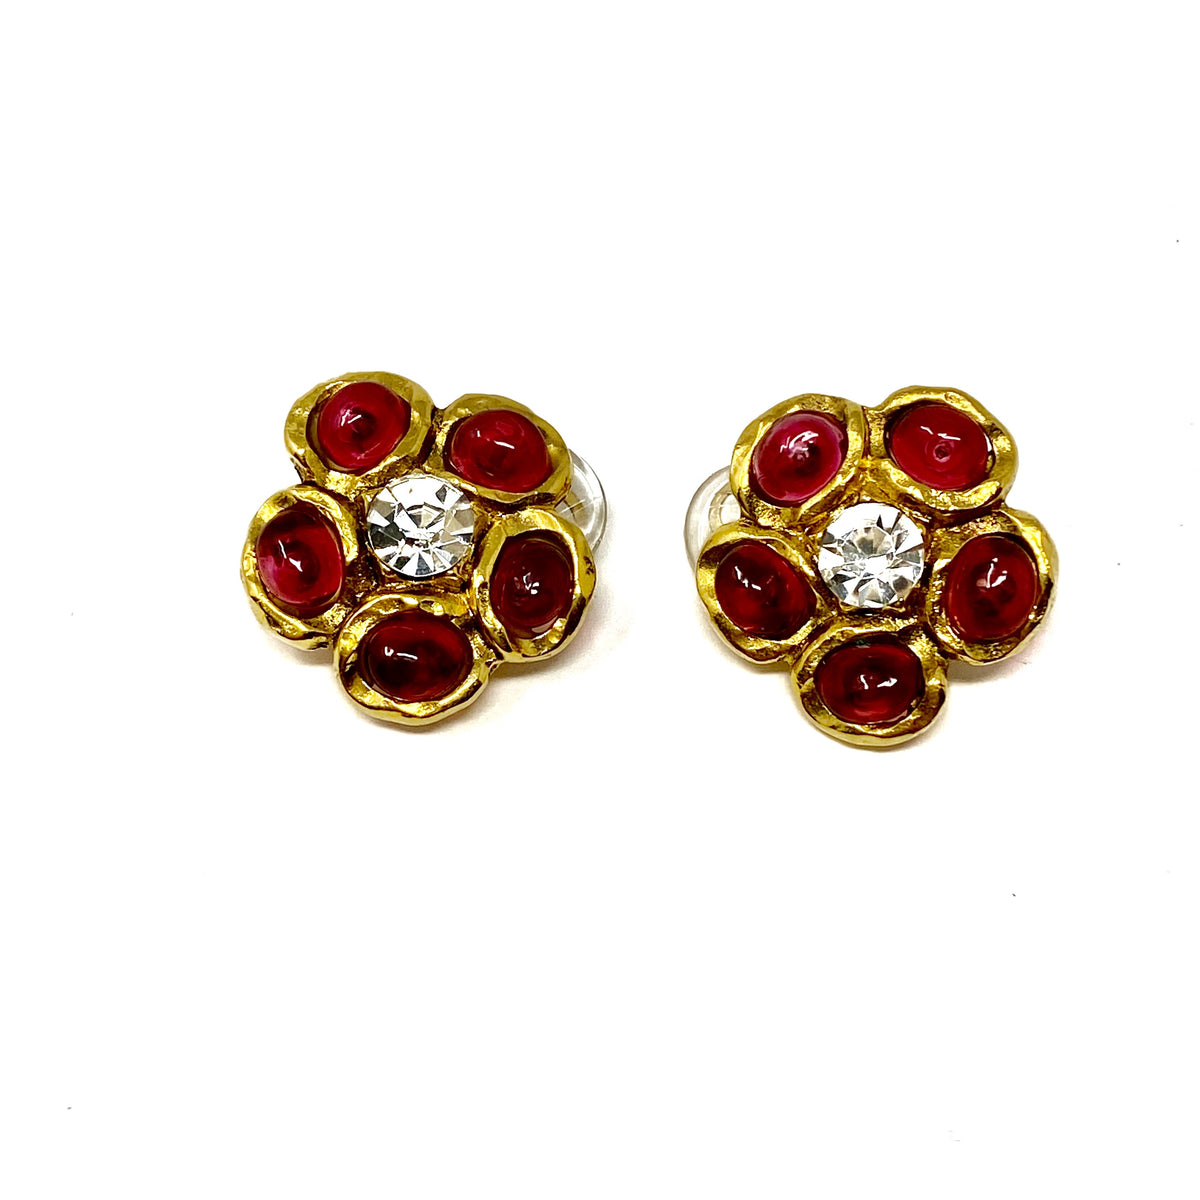 CHANEL, Jewelry, Vintage Chanel 97a Flower Cc Clipon Earrings Gripoix  Cabochons